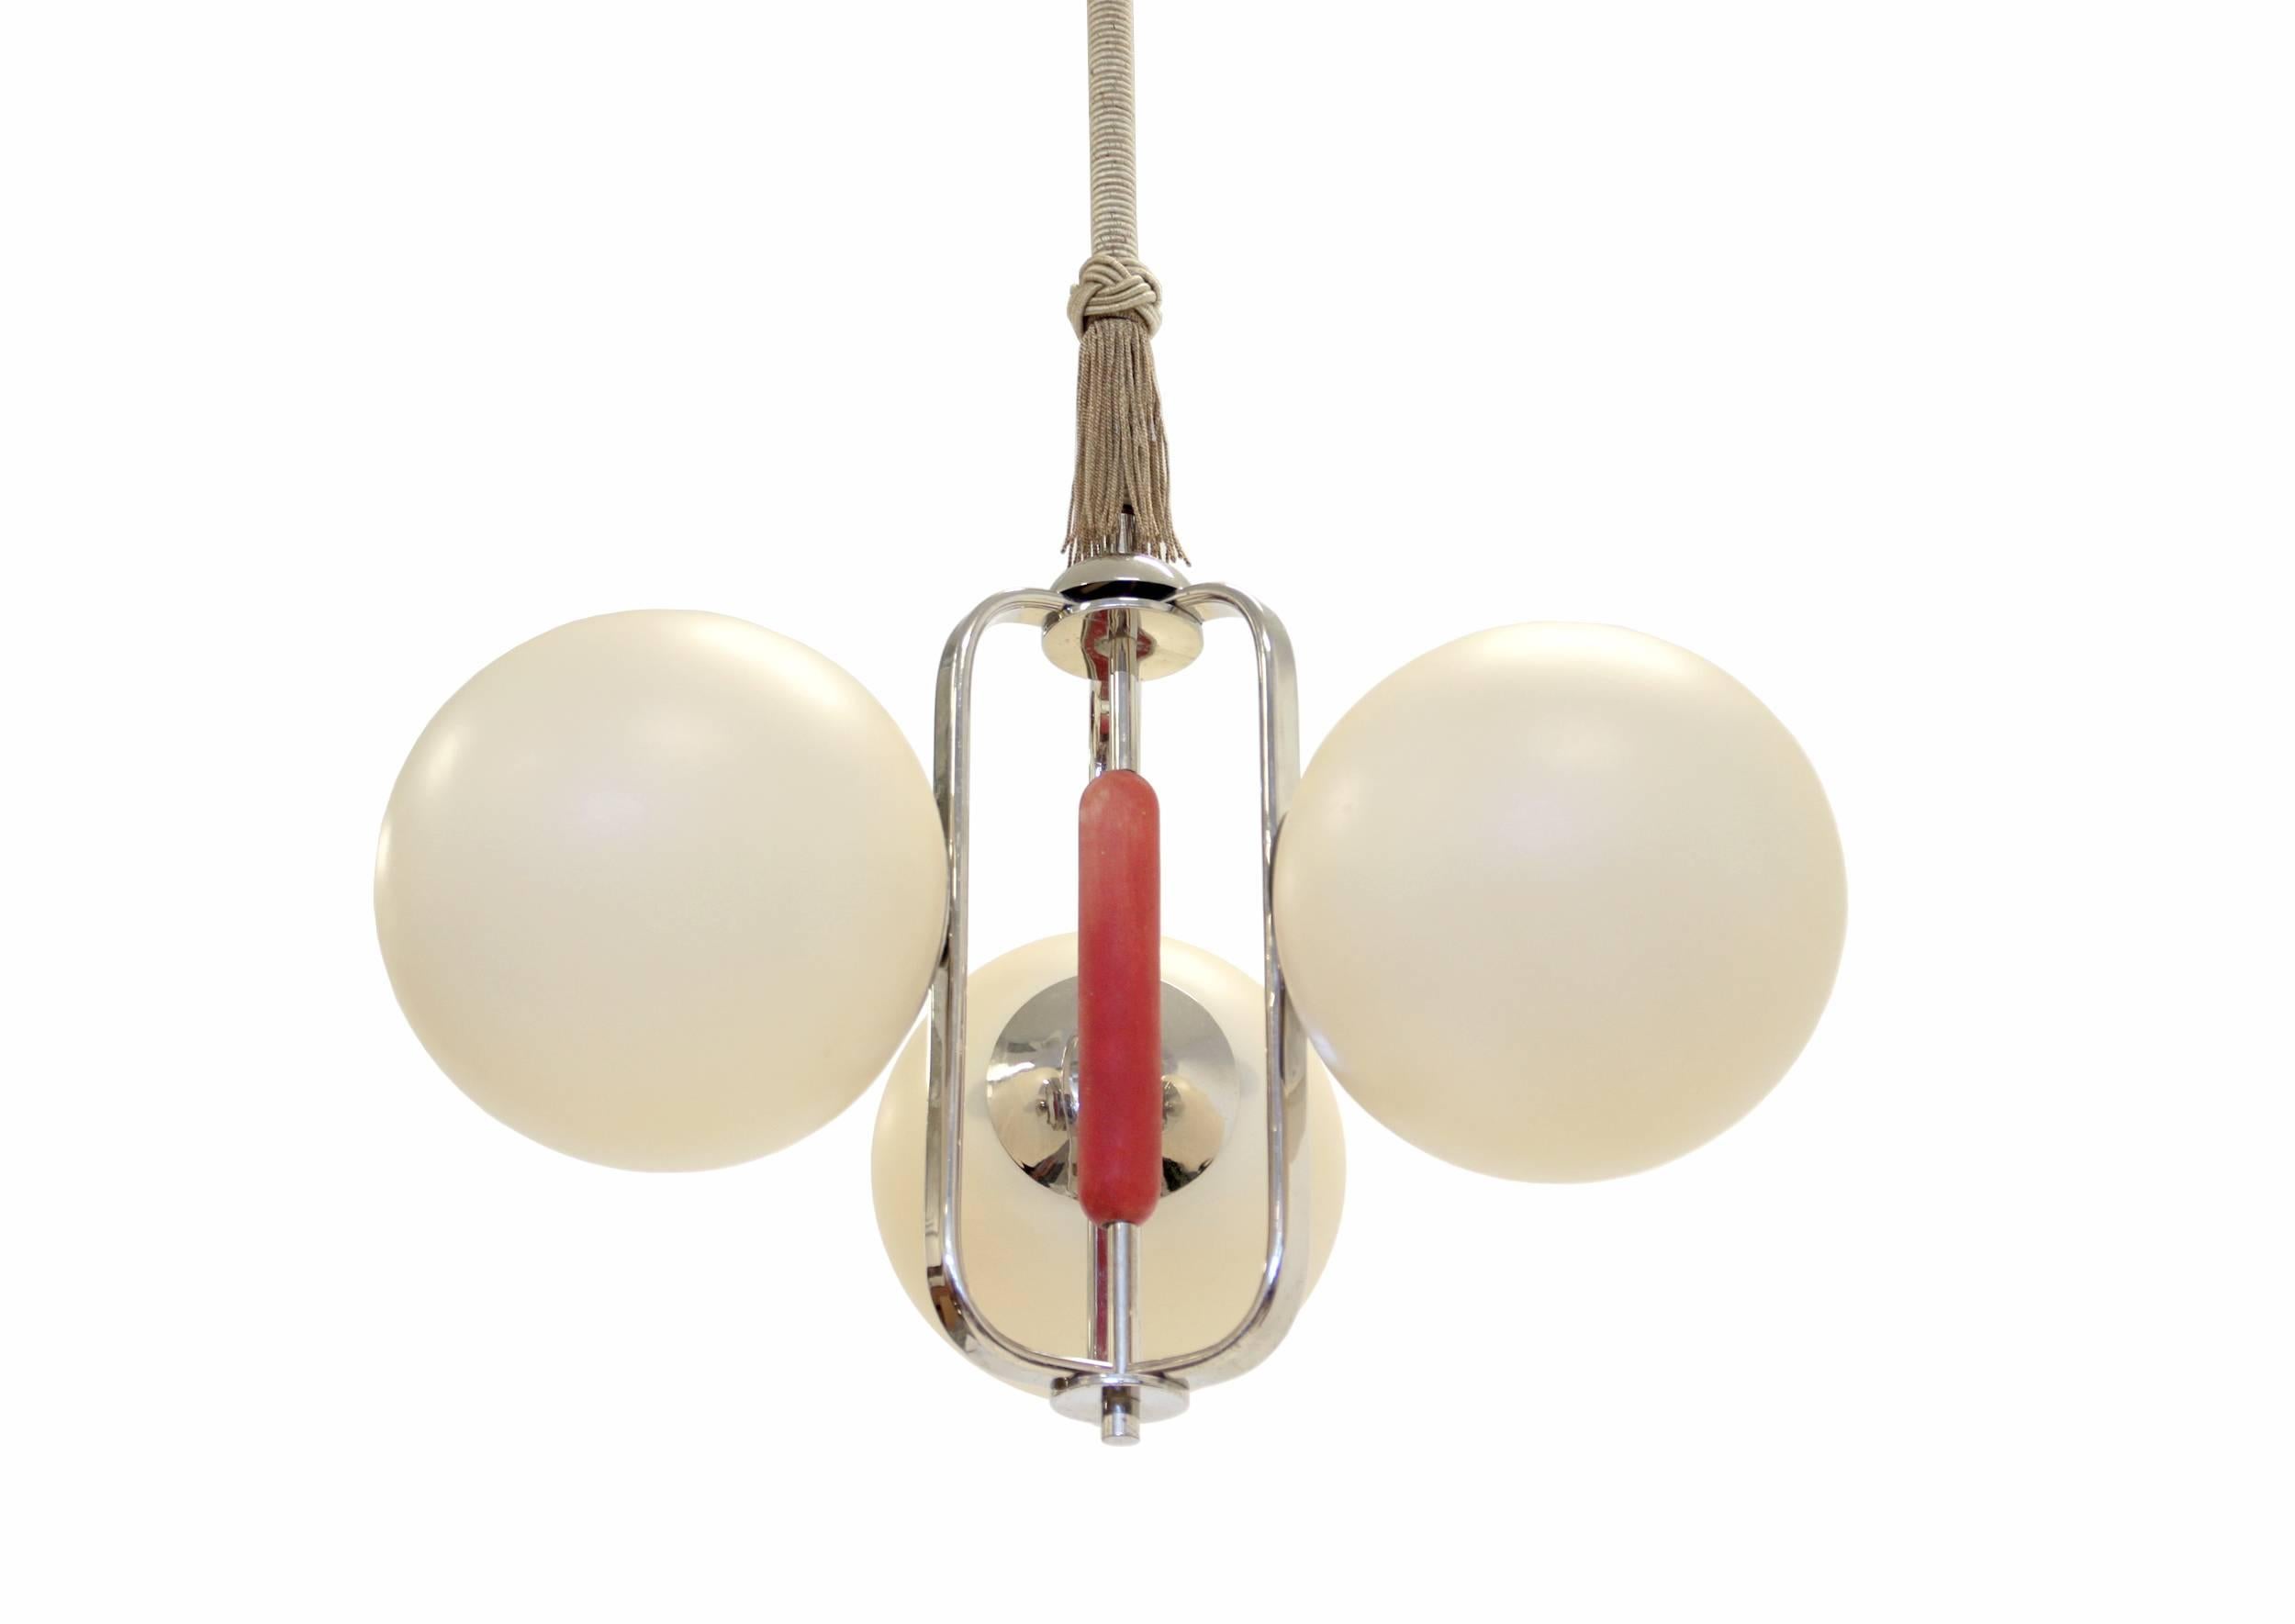 An exceptional and rare three-armed chandelier on a chromed steel frame and opaline glass. 

The lamp is from the early 1950s when the 'funkis/functionalist' movement inspired by continental Bauhaus swept across Scandinavia. This particular piece